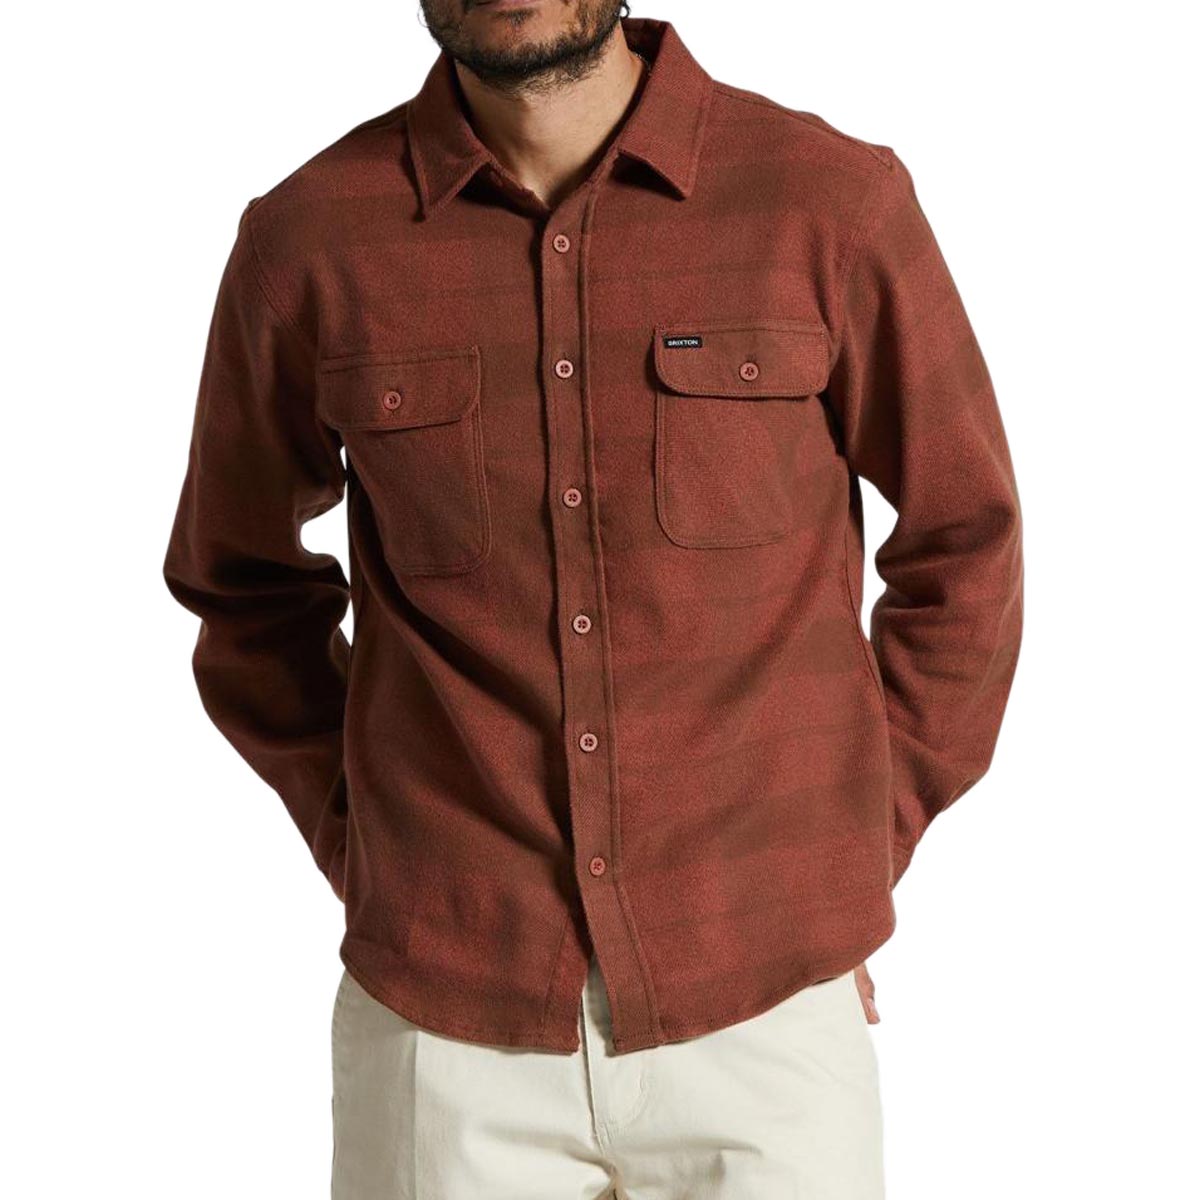 Brixton Bowery Stretch Water Resistant Flannel Shirt - Sepia/Terracotta image 1